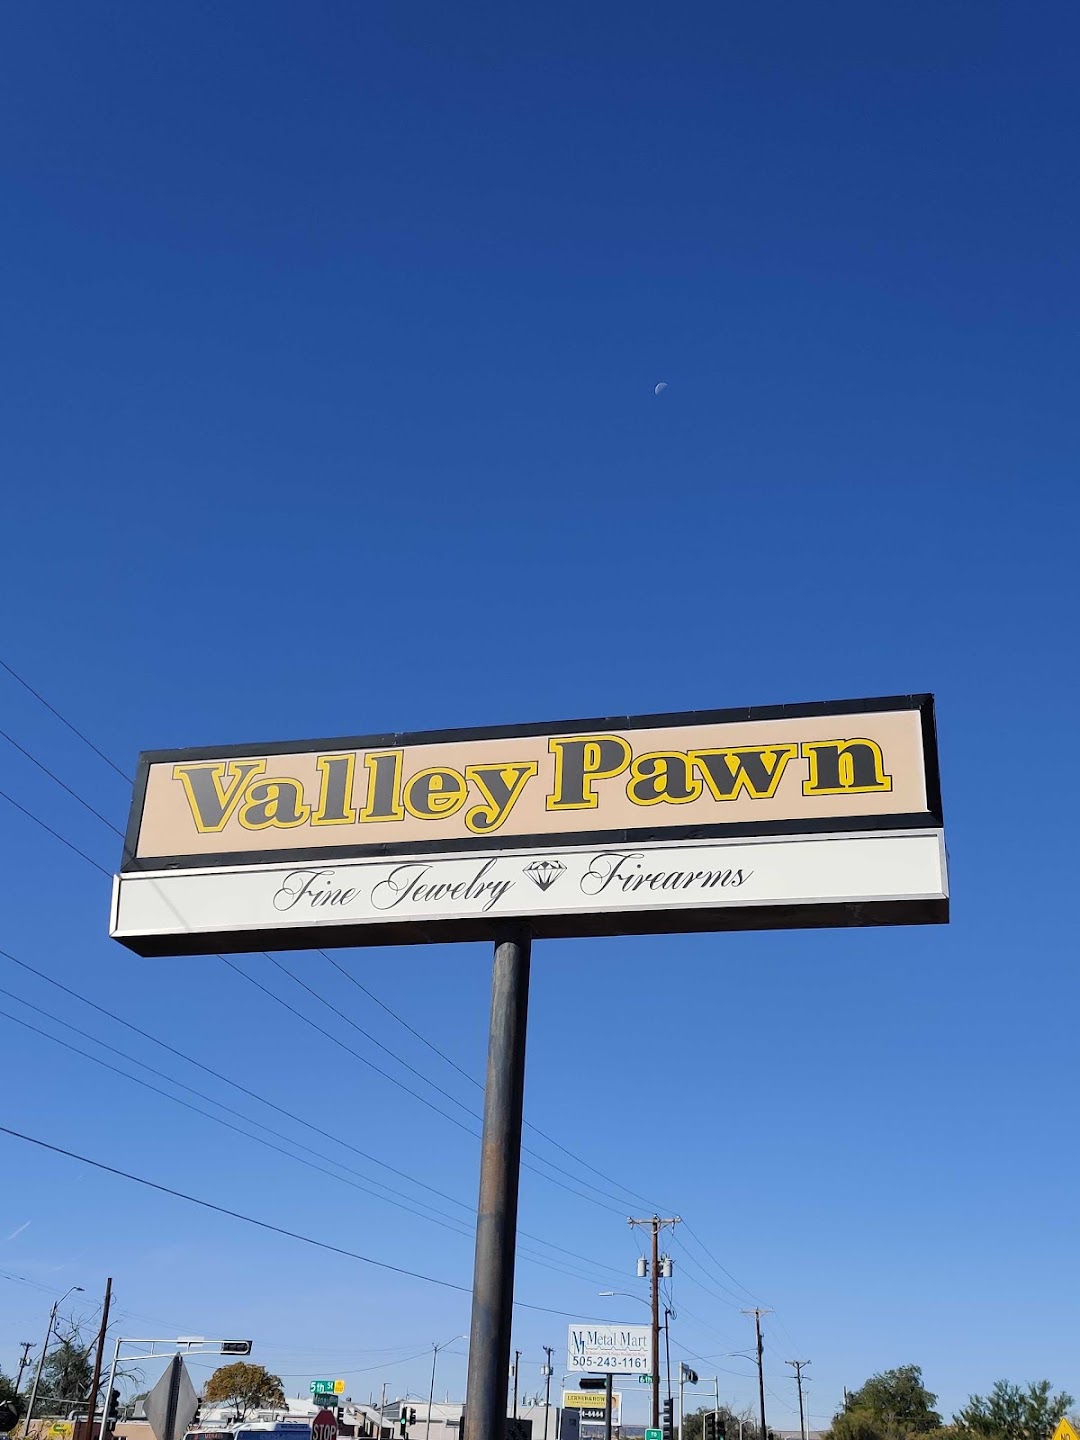 Valley Pawn